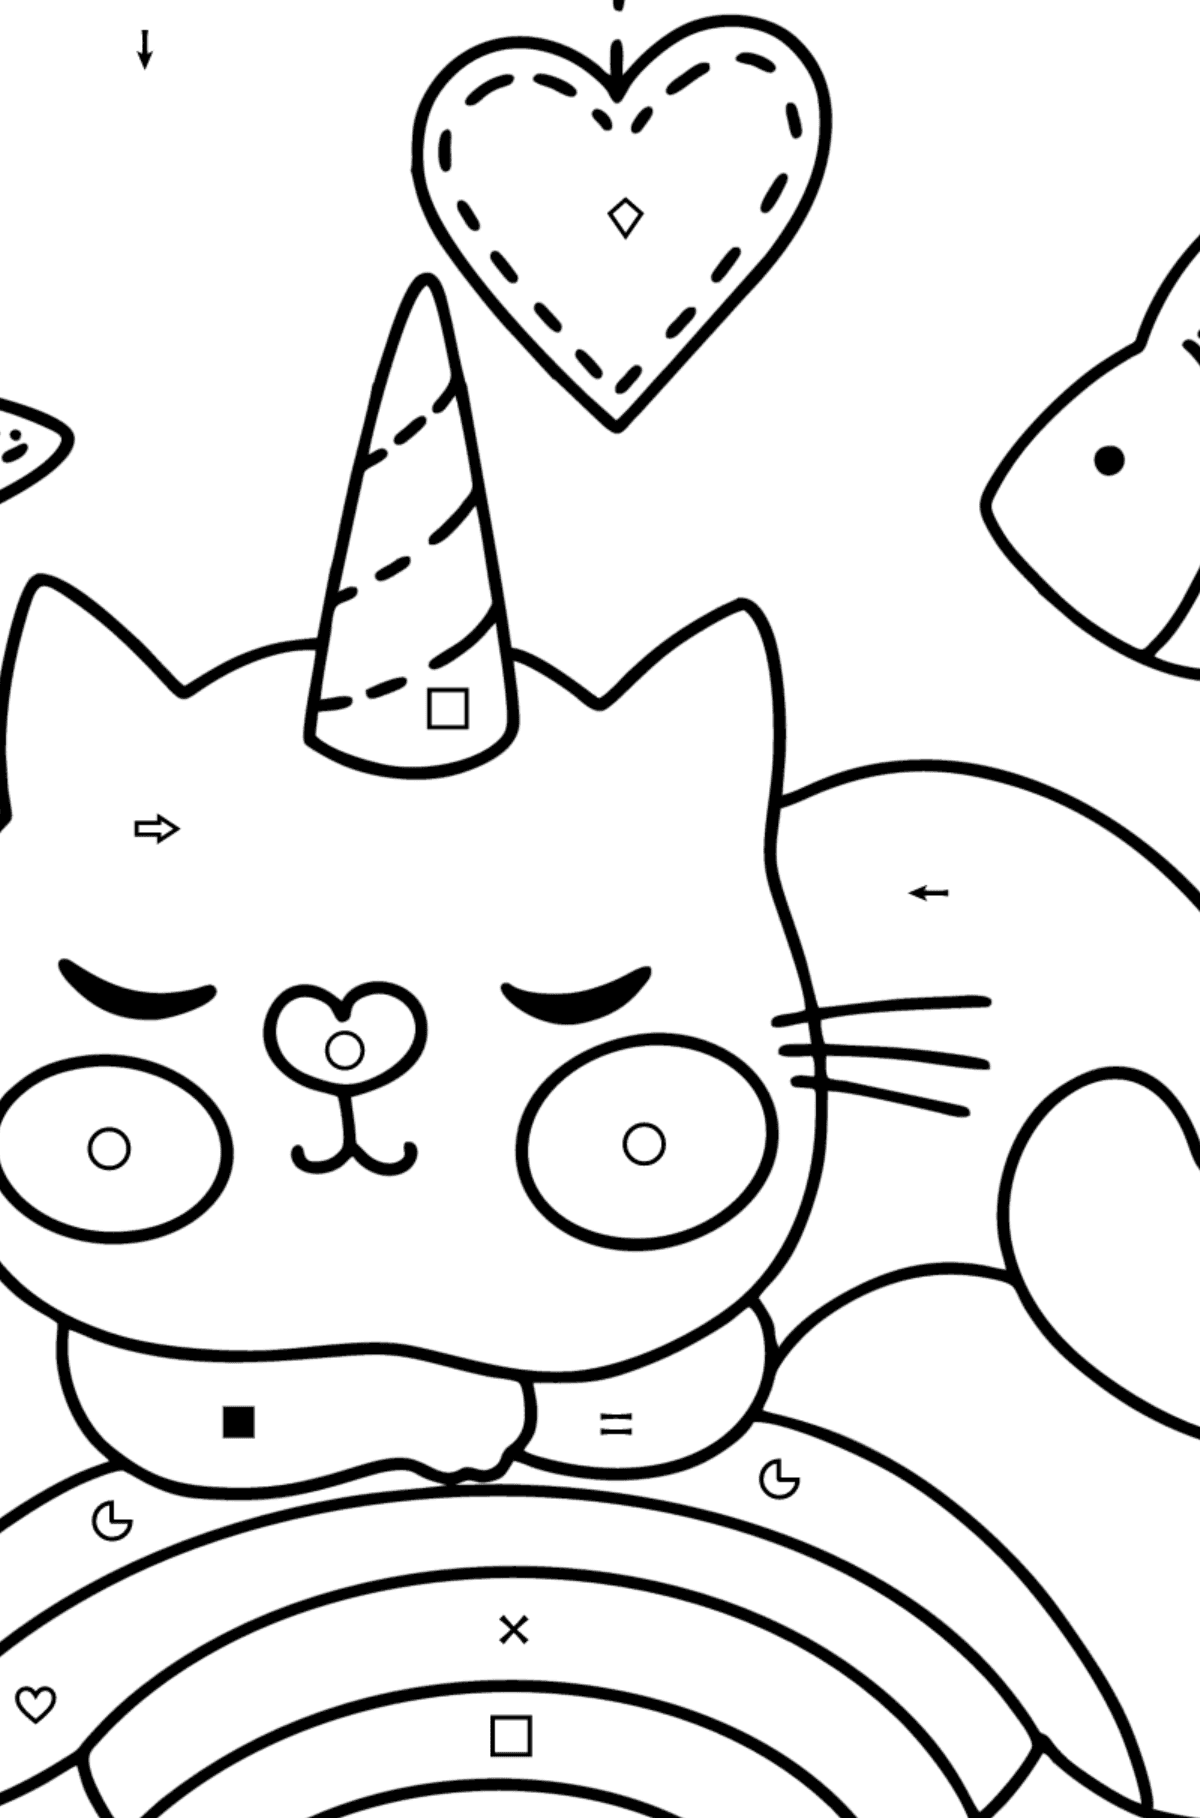 Cute cat unicorn coloring page - Coloring by Symbols and Geometric Shapes for Kids